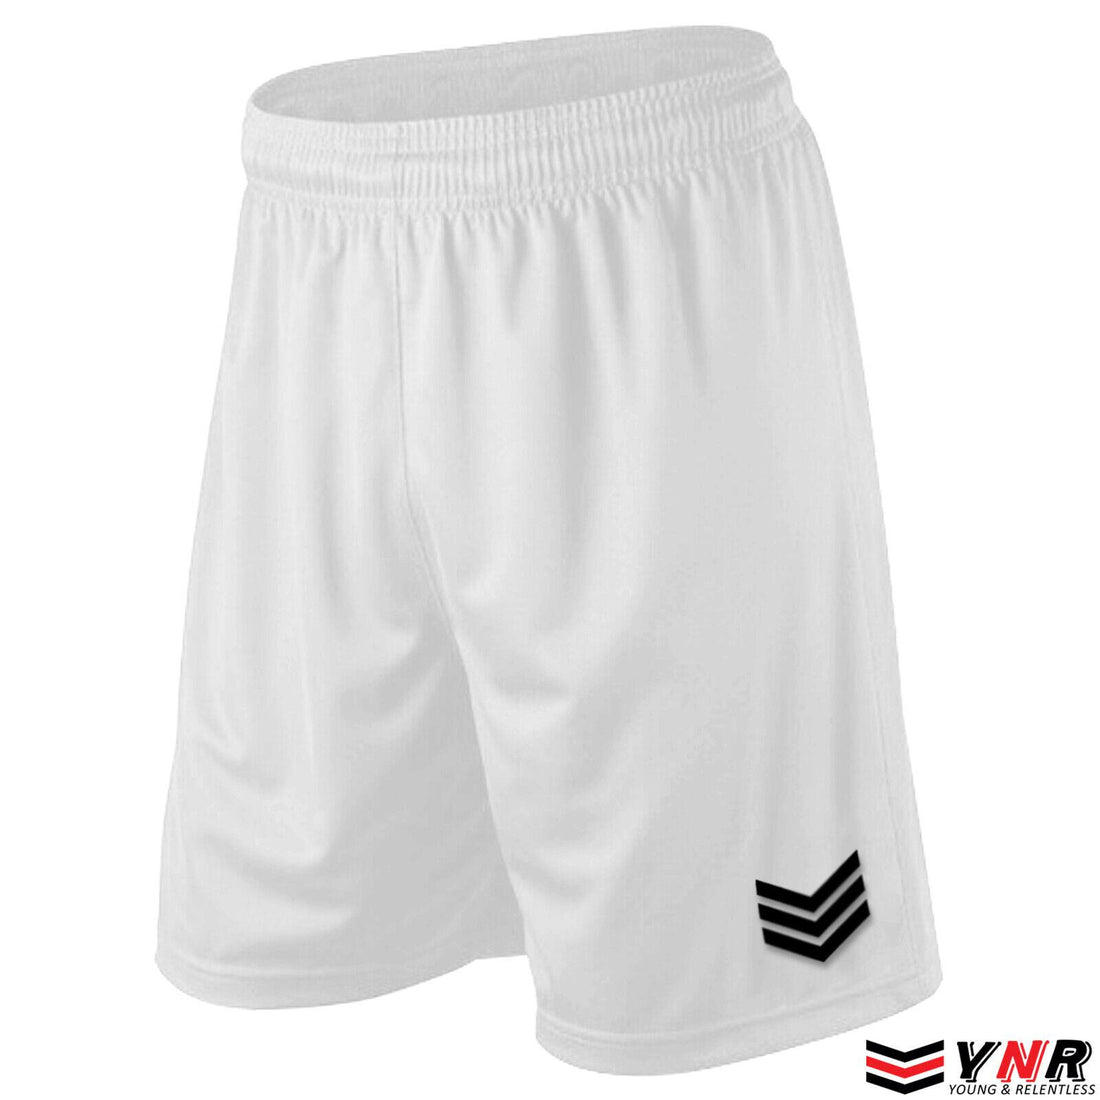 Mens Football Shorts Jogging Running Gym Sports Breathable Fitness Size S - XL